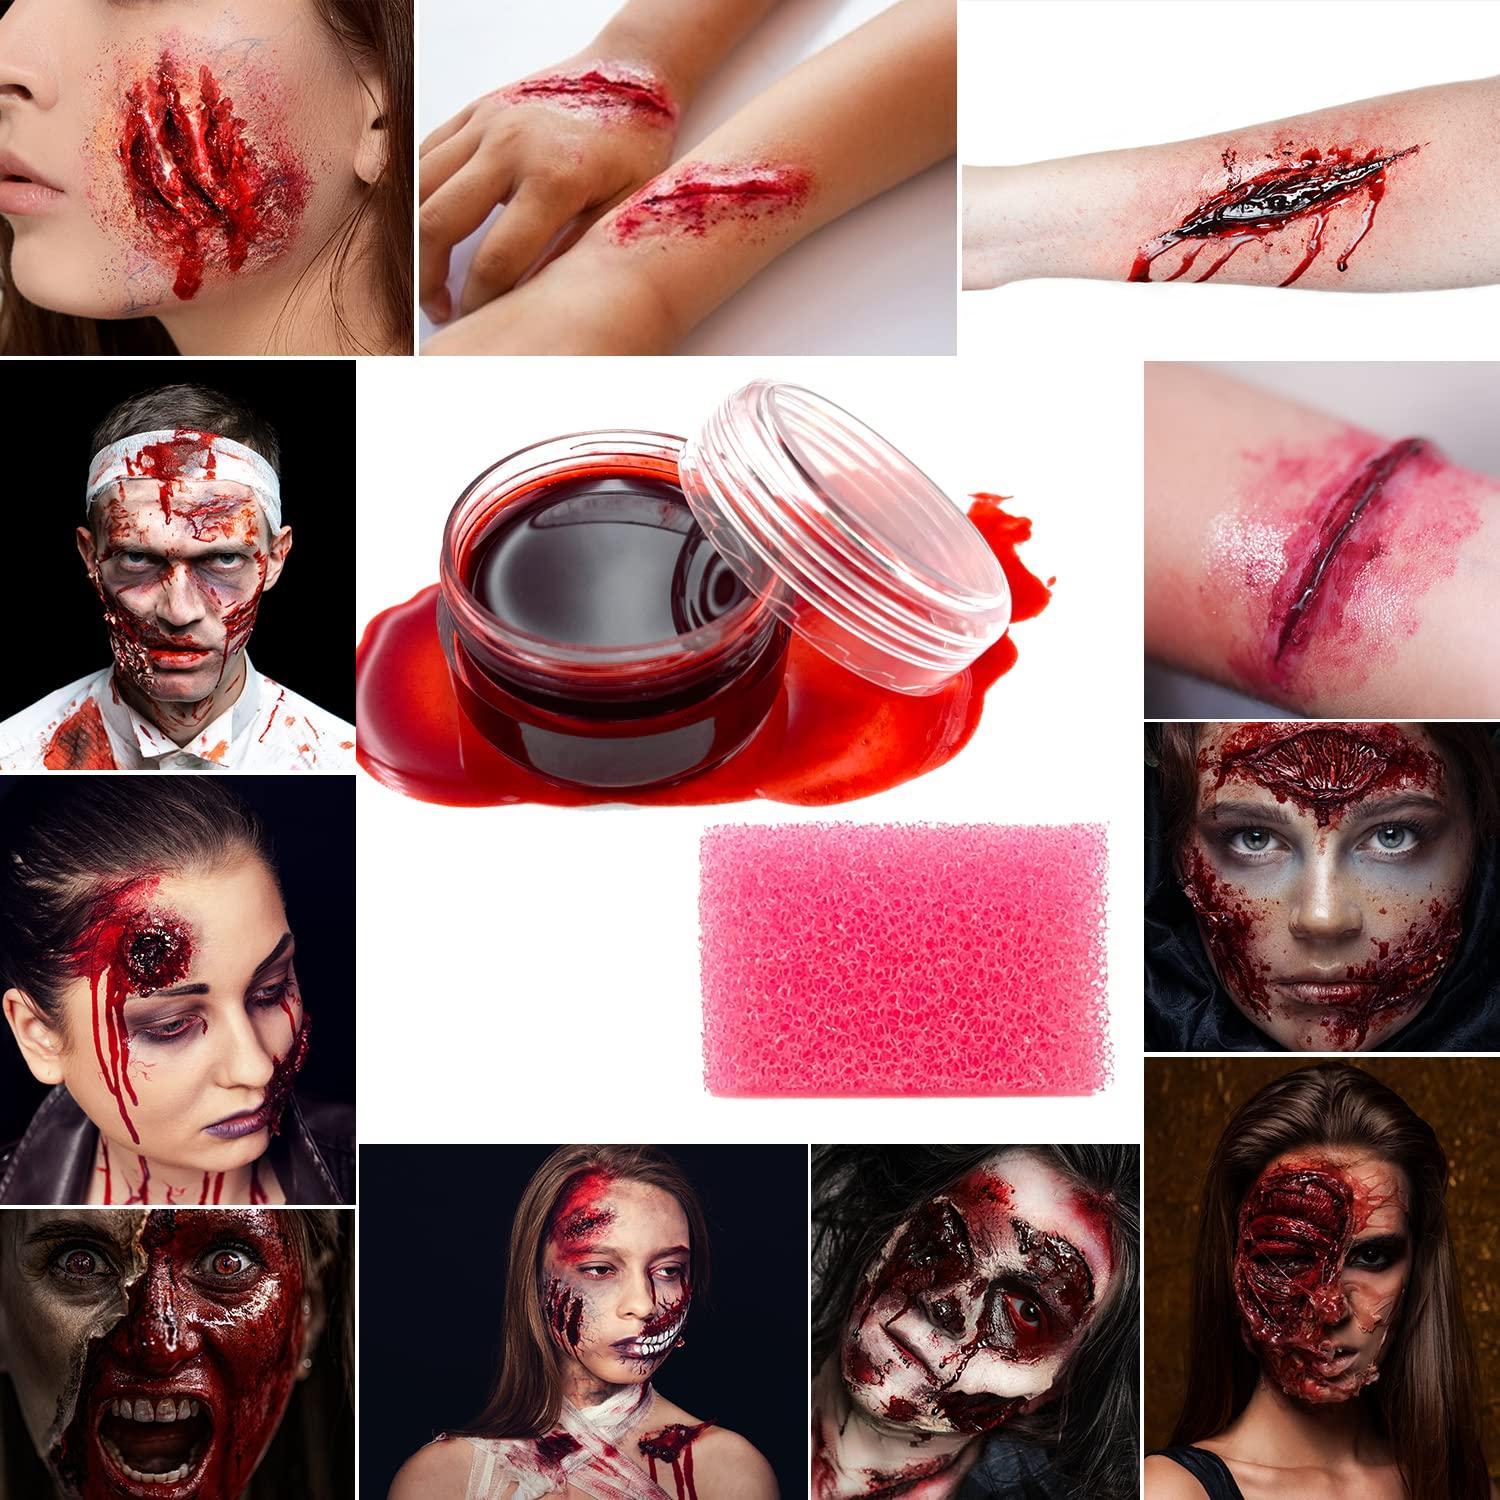 Halloween Fake Wounds Scars Wax Bruises Body Face Painting Cosplay SFX  Makeup Kit Body Face Paint Tools Sponge&Spatula